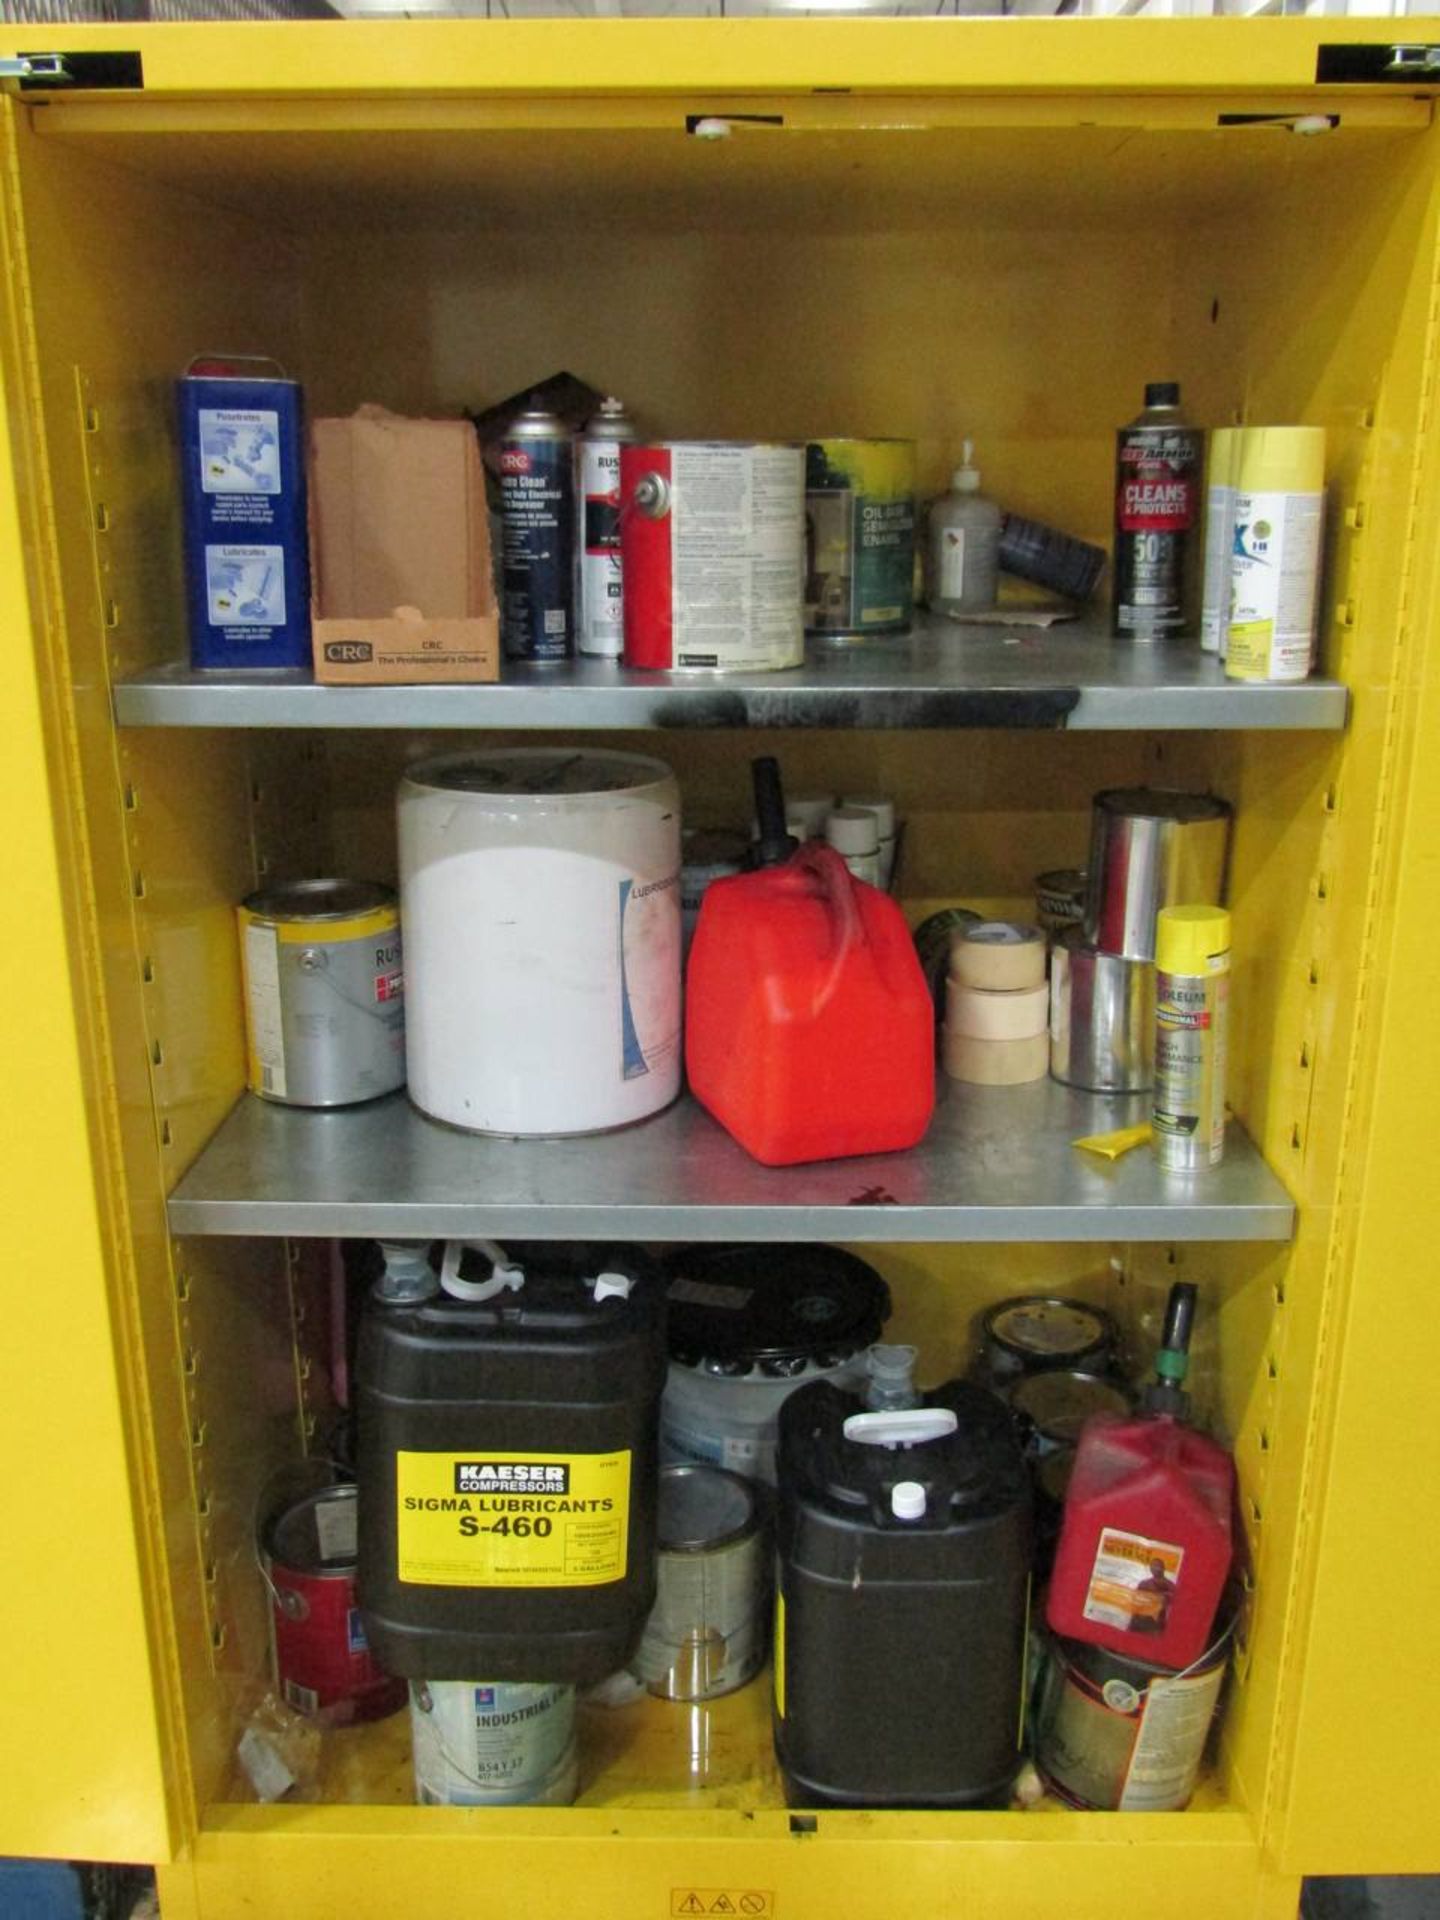 Uline H-22195-Y Flammables Storage Cabinet - Image 3 of 3